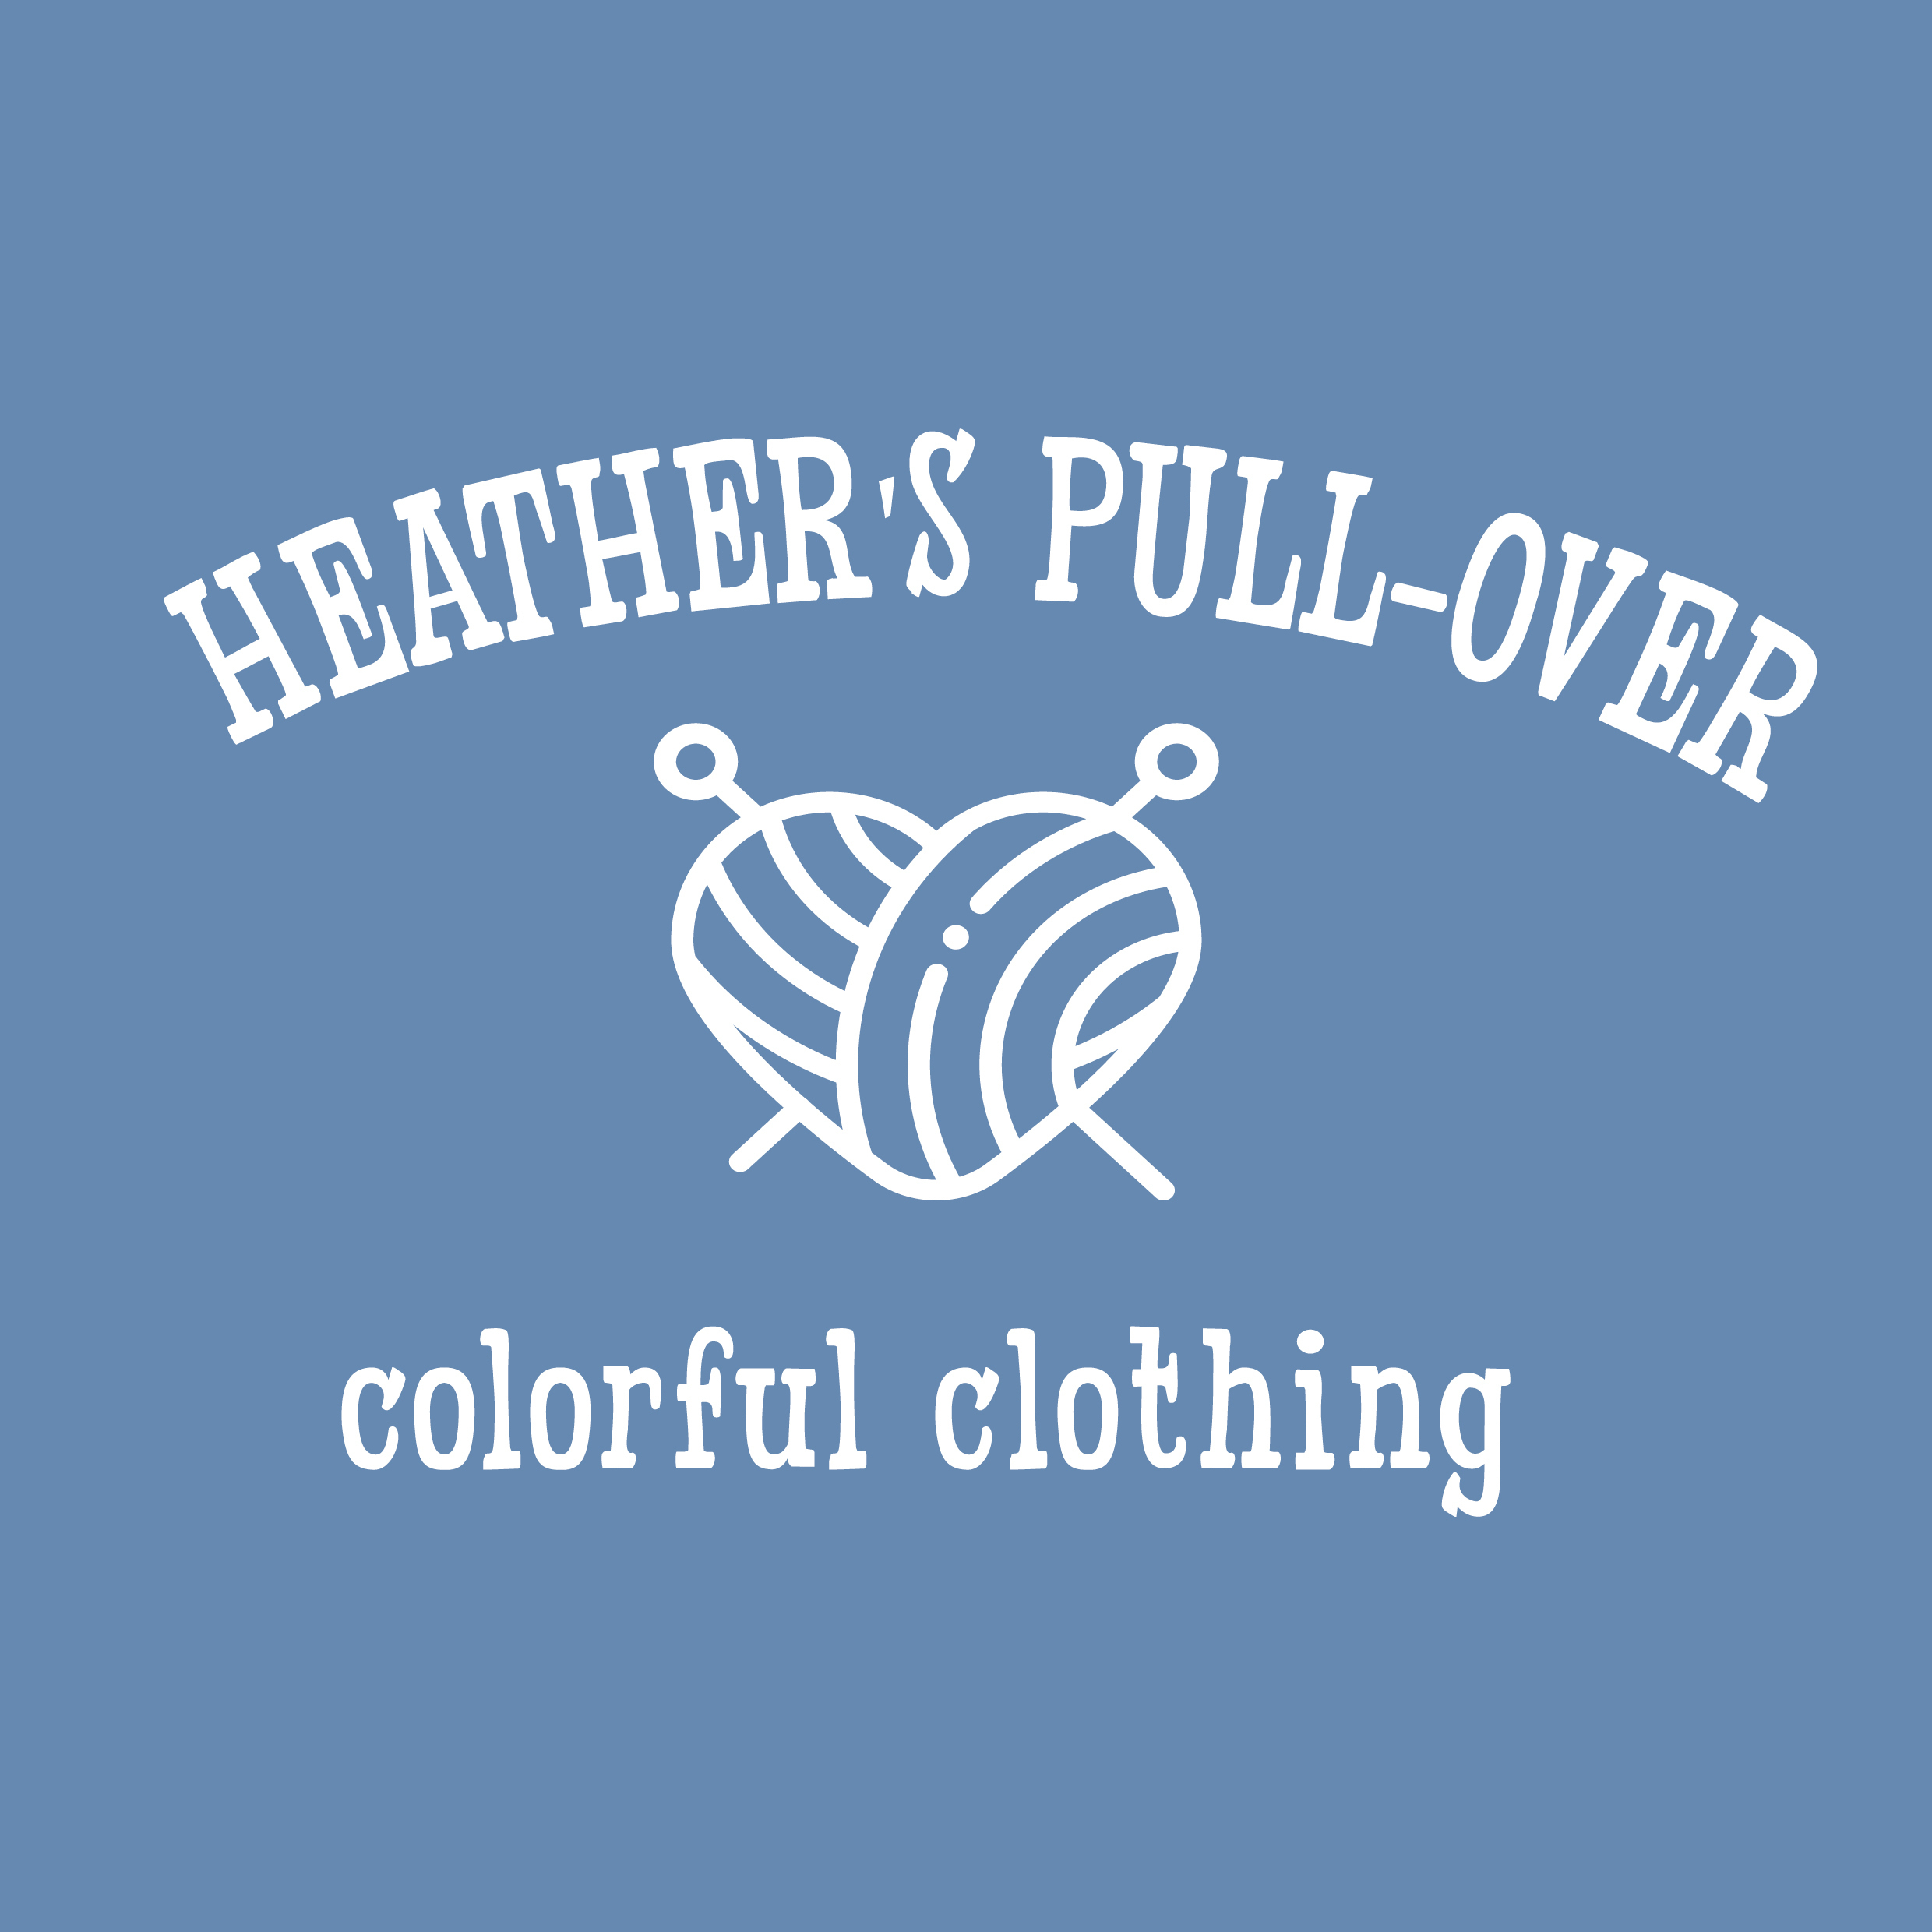 Heather's Pull-Over